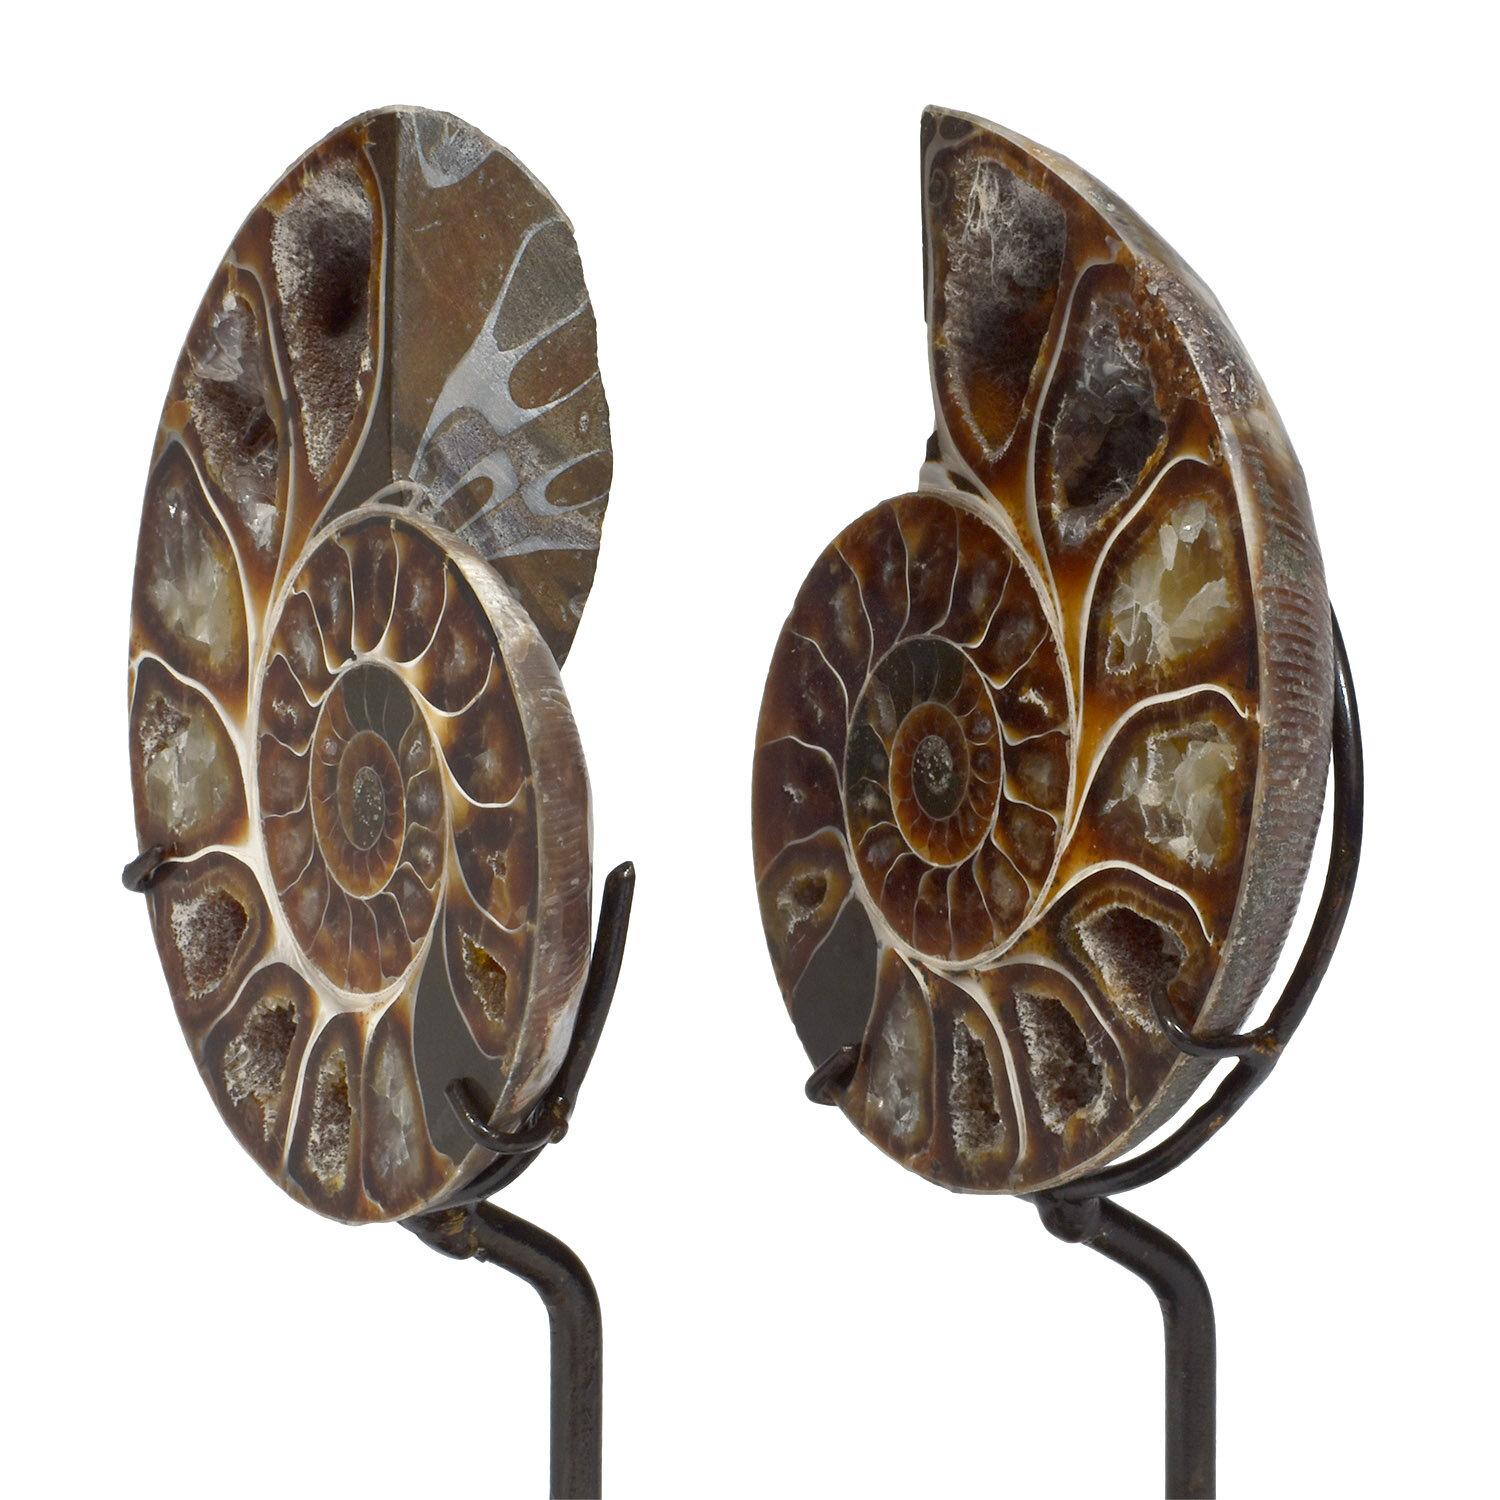 Moroccan Matched Pair of Split Ammonite Fossil